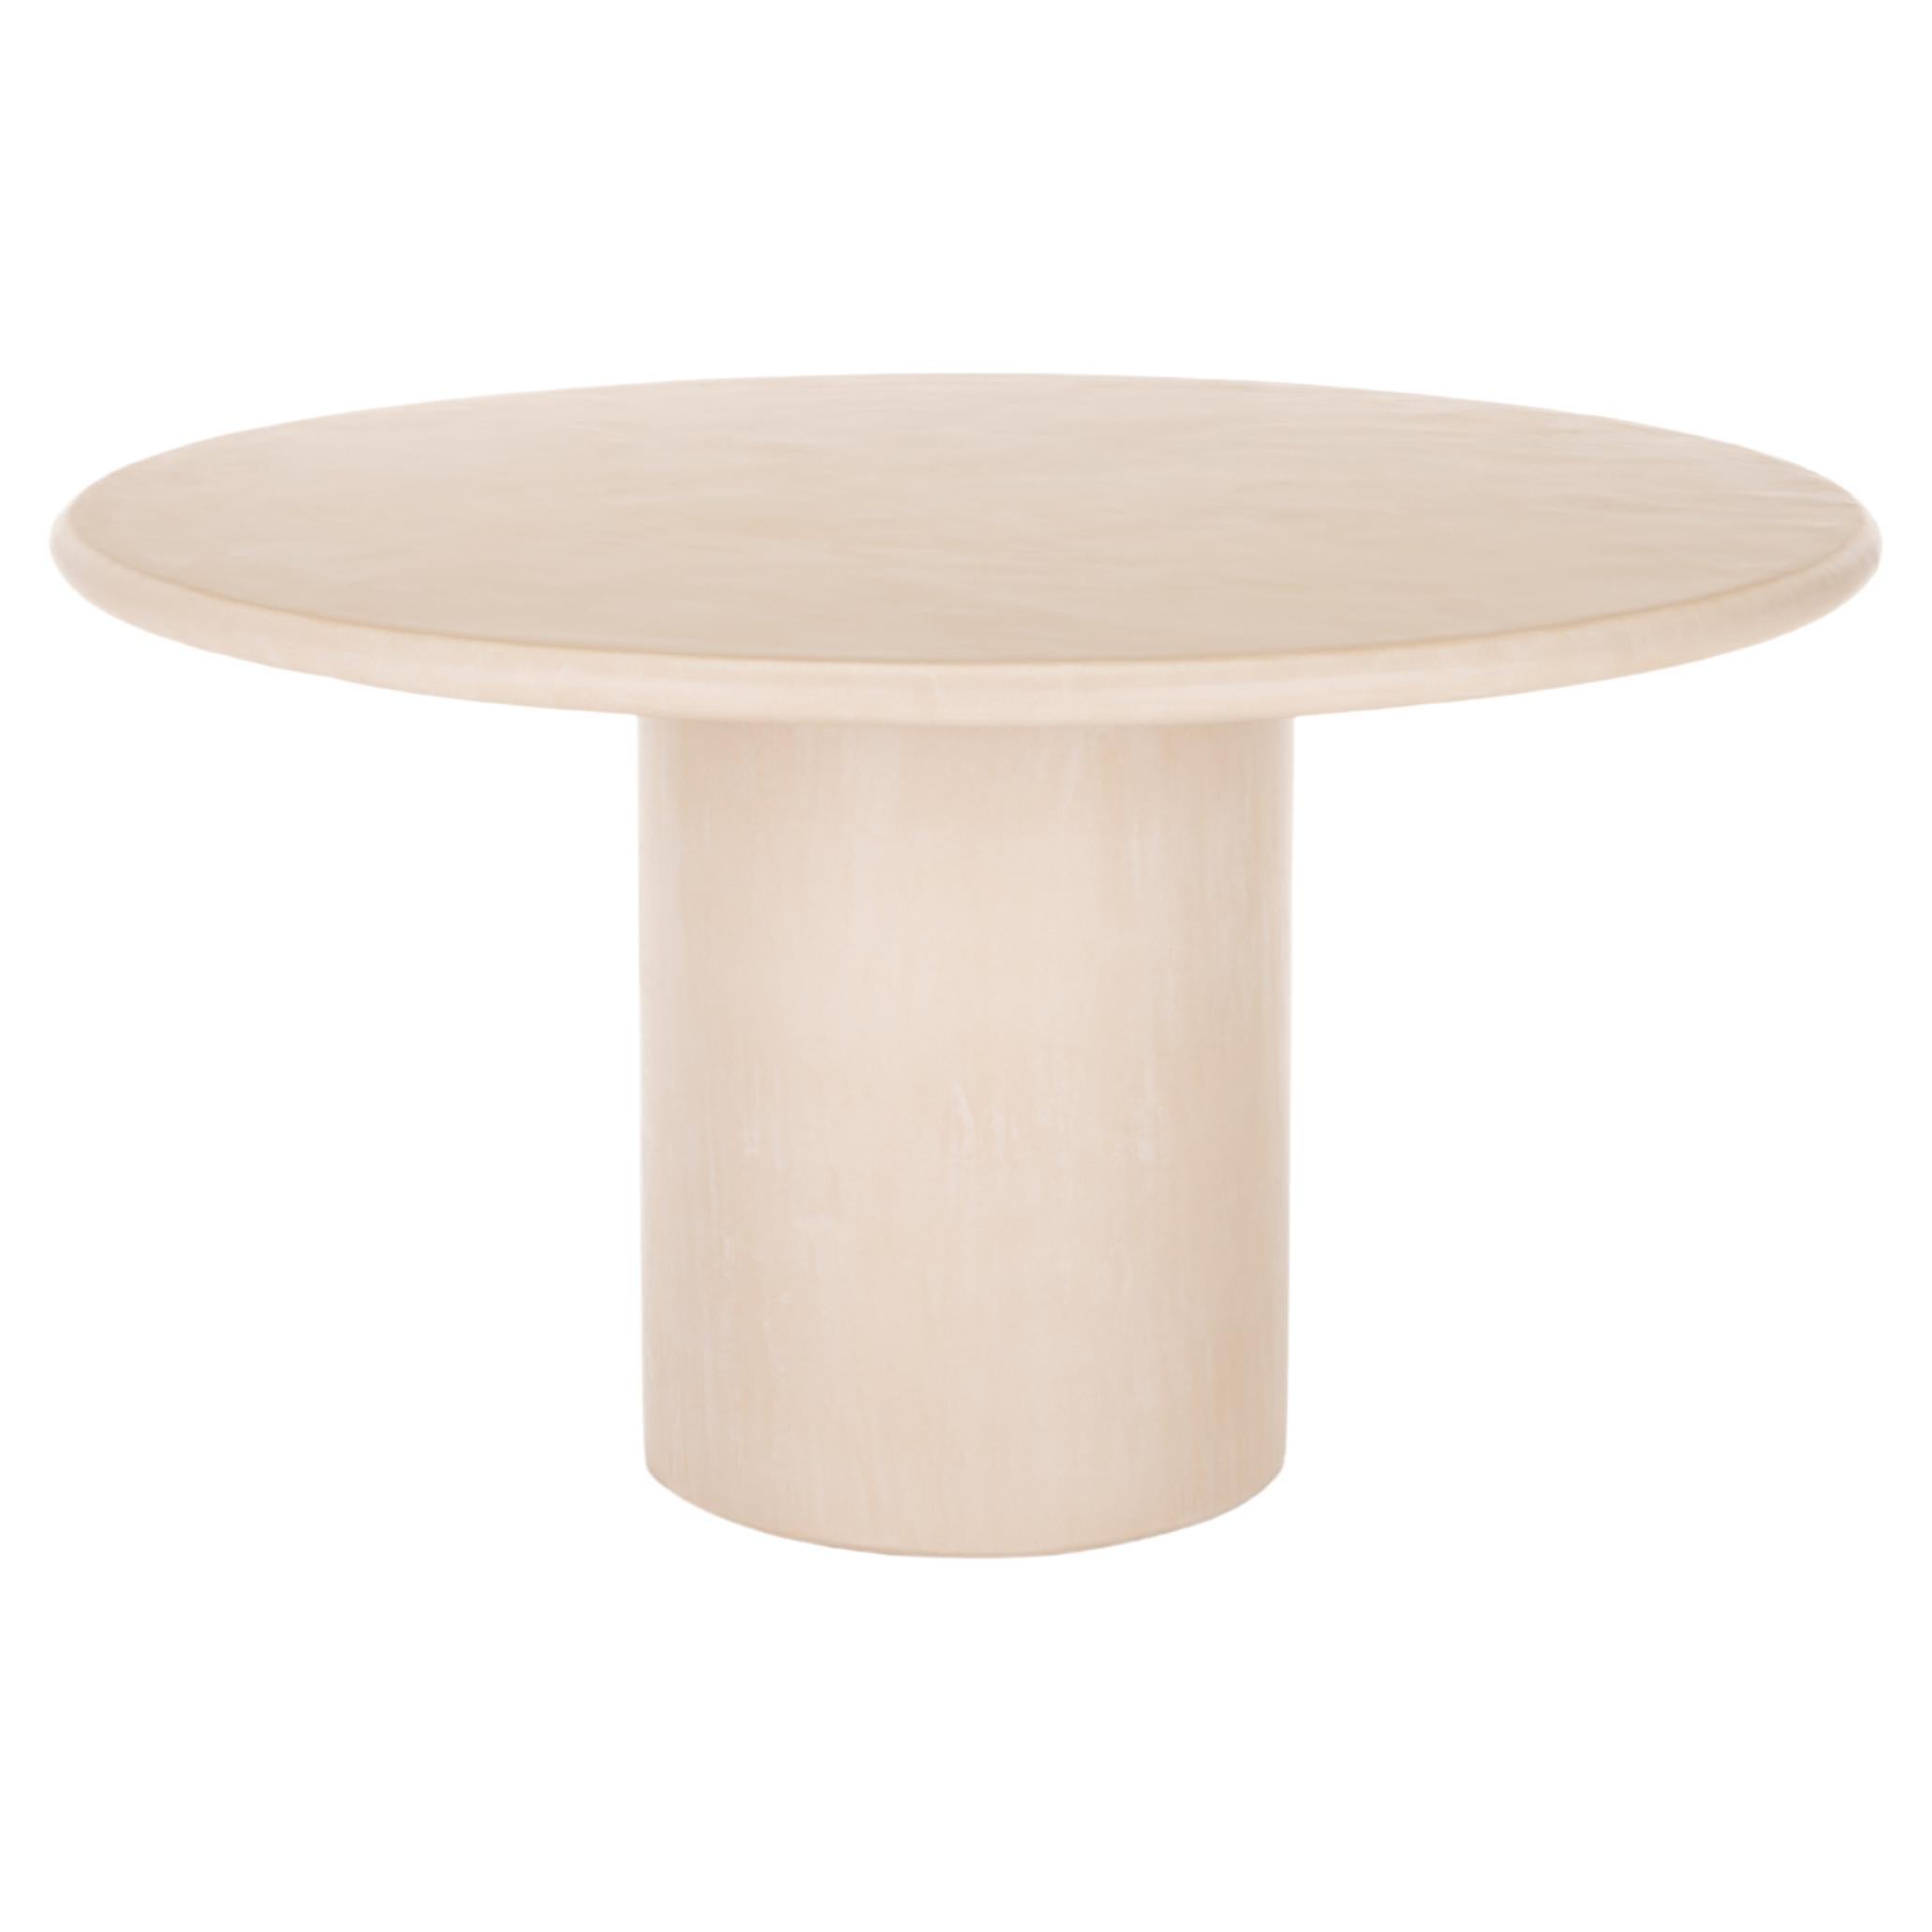 Contemporary Round Natural Plaster "Column" Table 160cm by Isabelle Beaumont